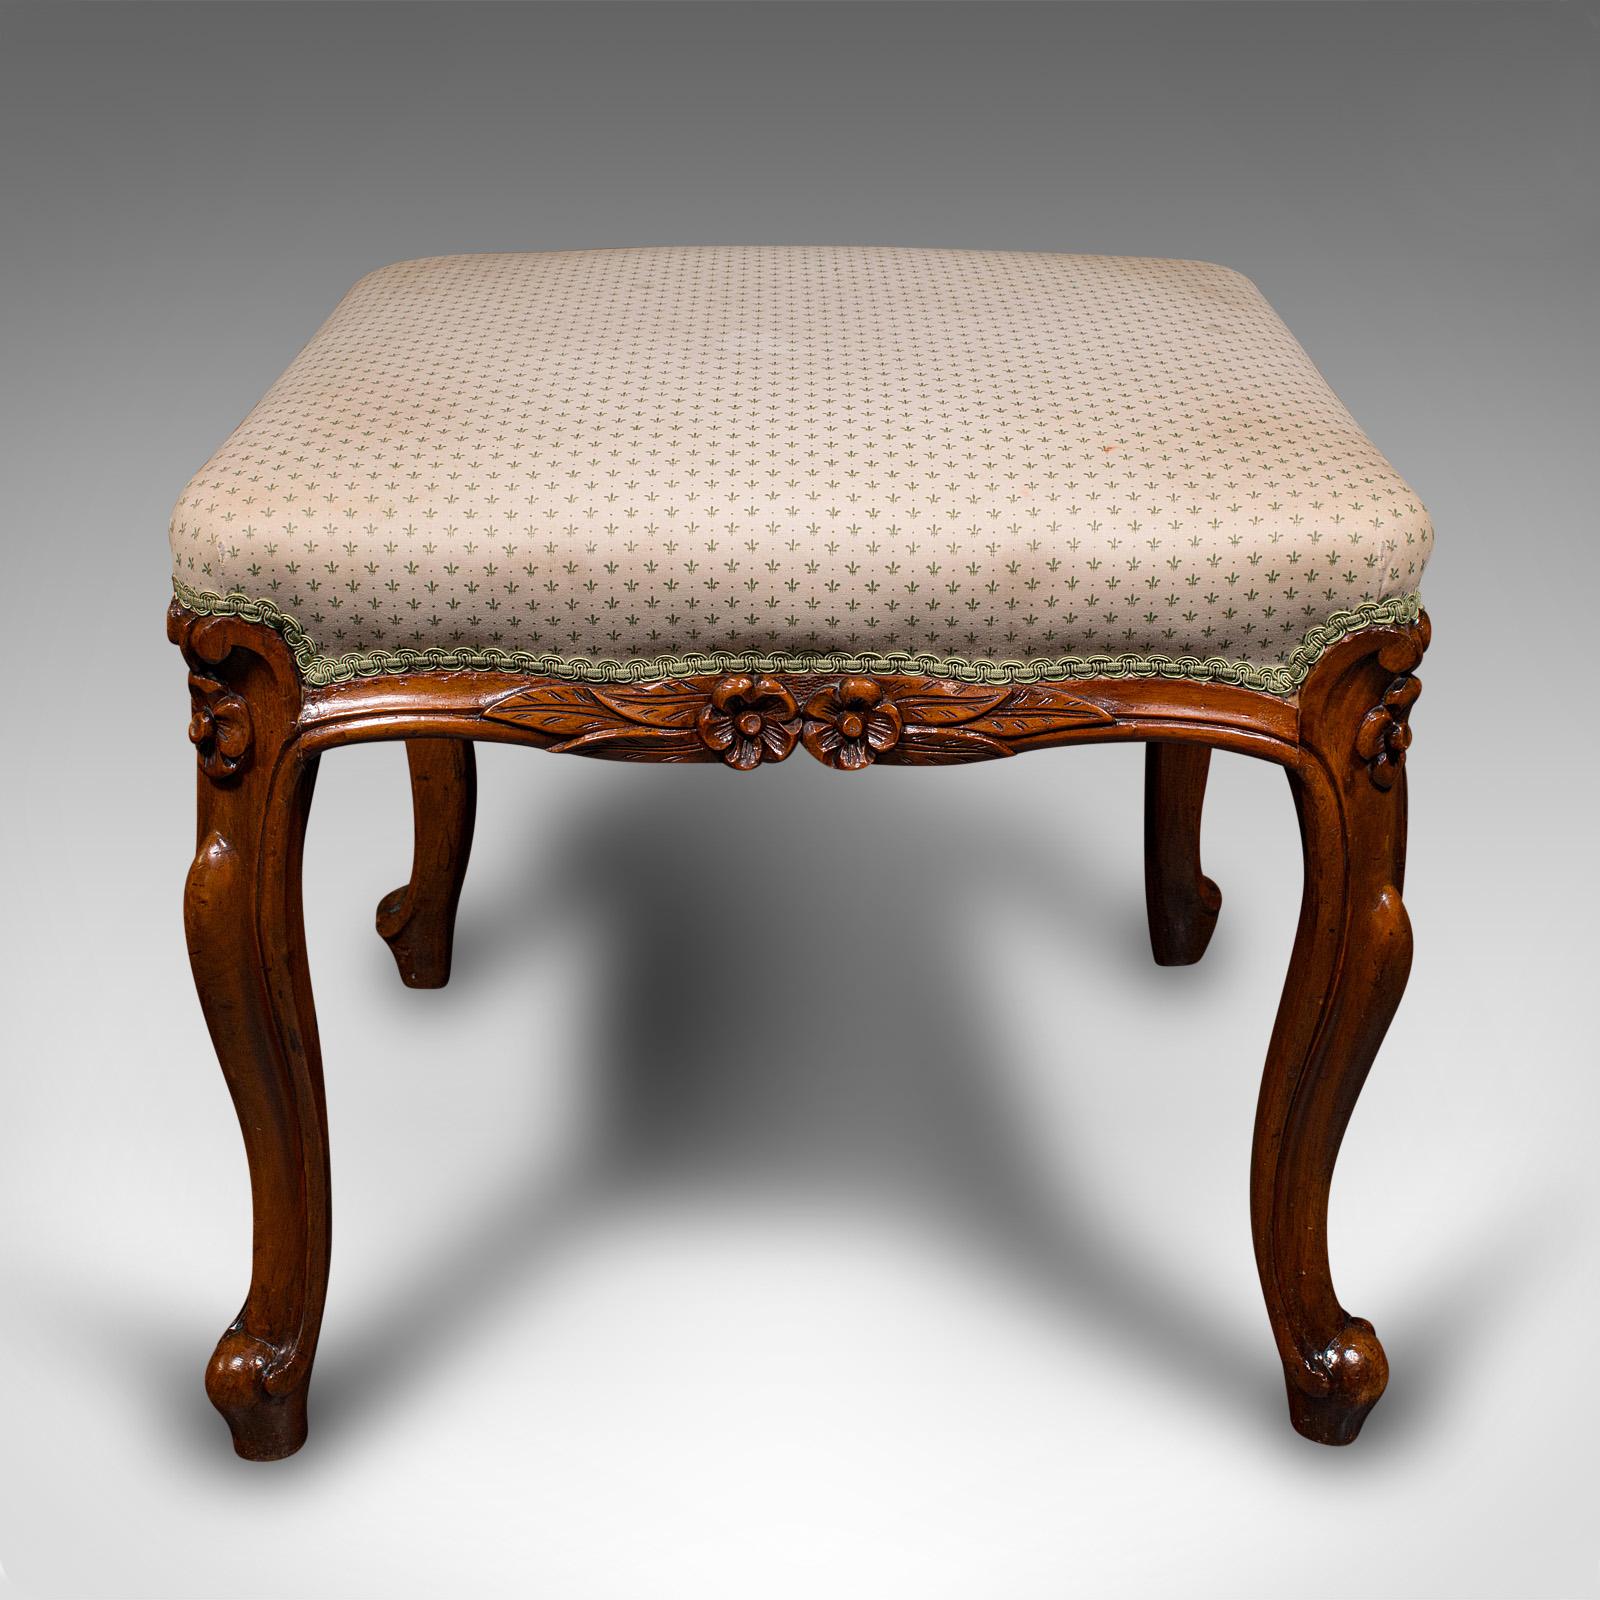 This is a wide antique dressing stool. An English, walnut bedroom seat, dating to the early Victorian period, circa 1840.

Comfortable and of a generously wide proportion
Displays a desirable aged patina throughout
Delightful walnut frame shows fine